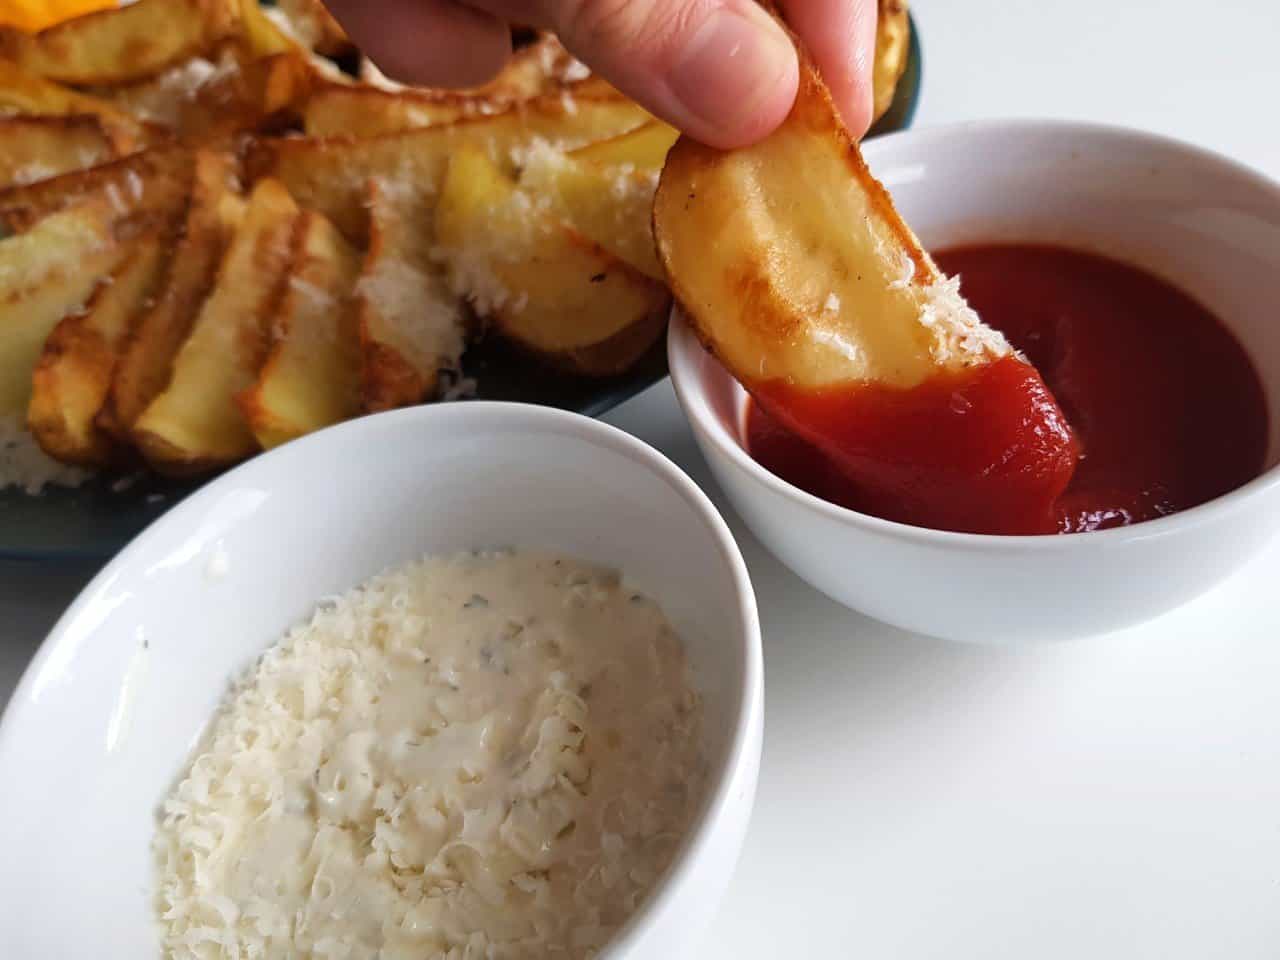 Crispy potato wedges dipped into ketchup.